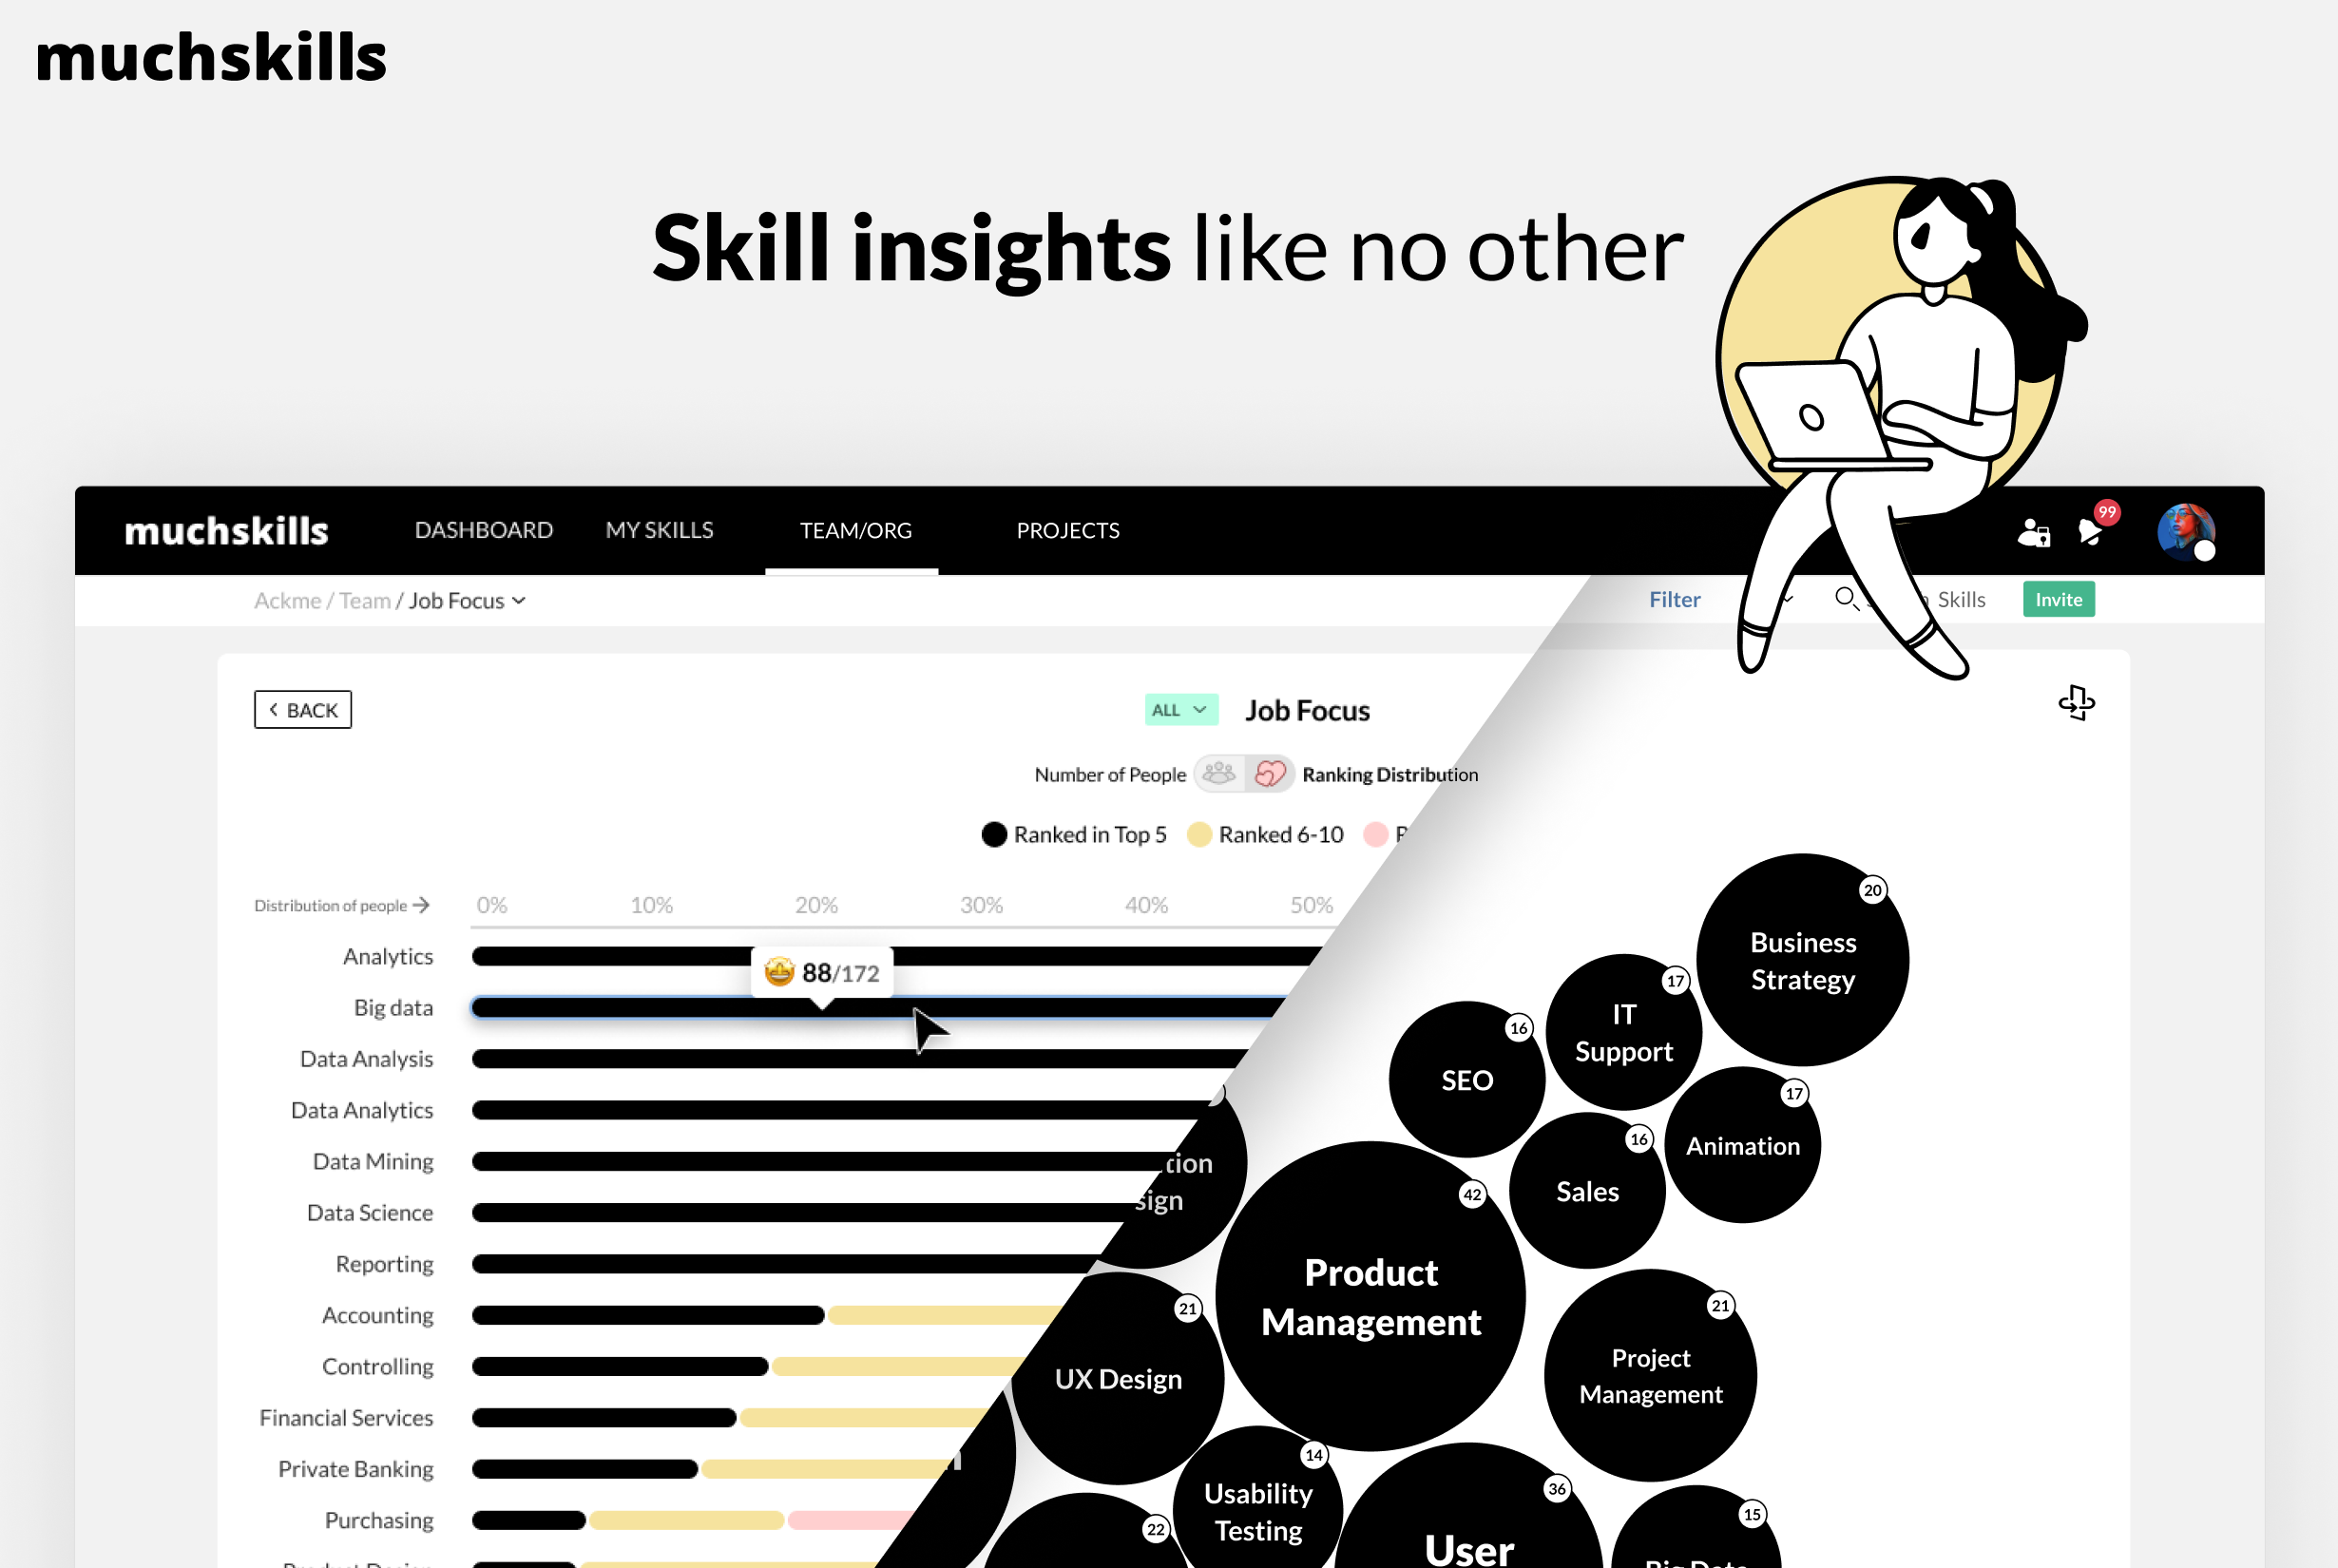 Skill insights like never before